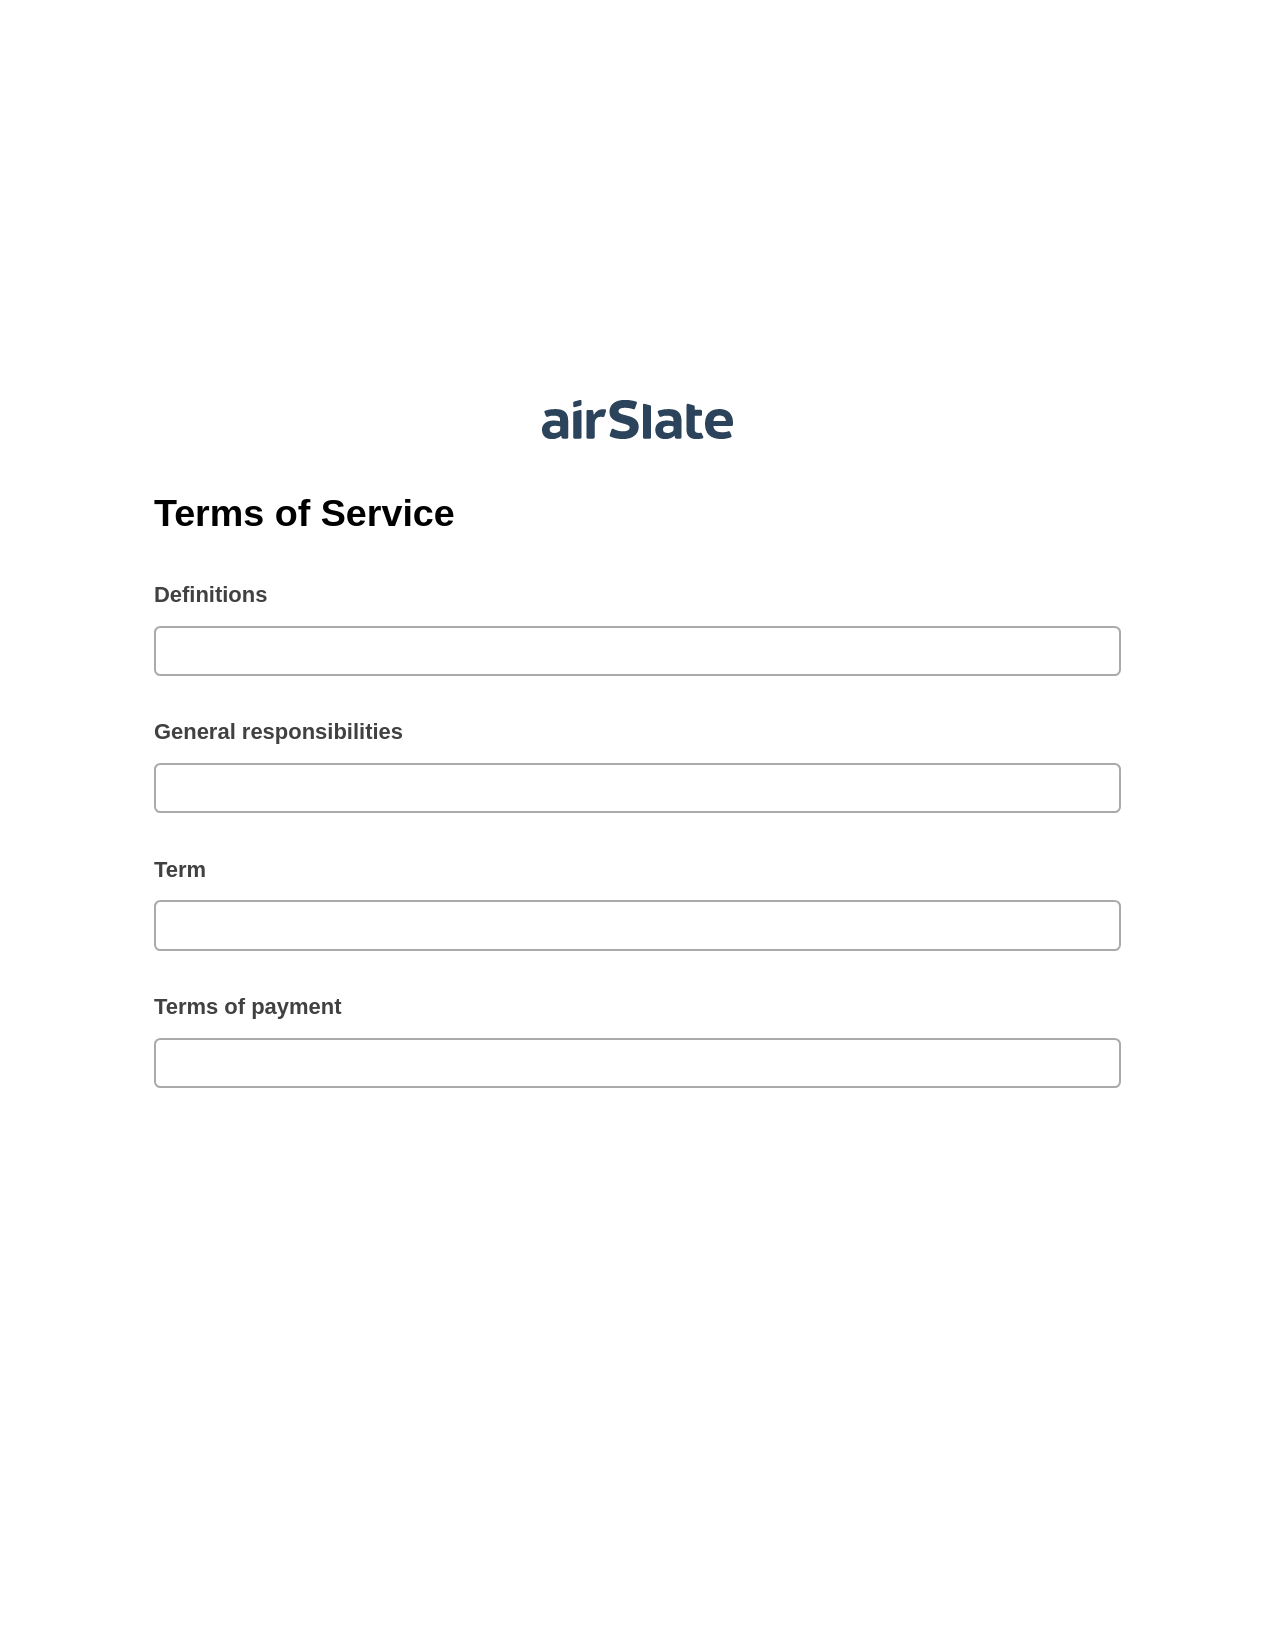 Terms of Service Pre-fill Slate from MS Dynamics 365 Records Bot, Create QuickBooks invoice Bot, Dropbox Bot